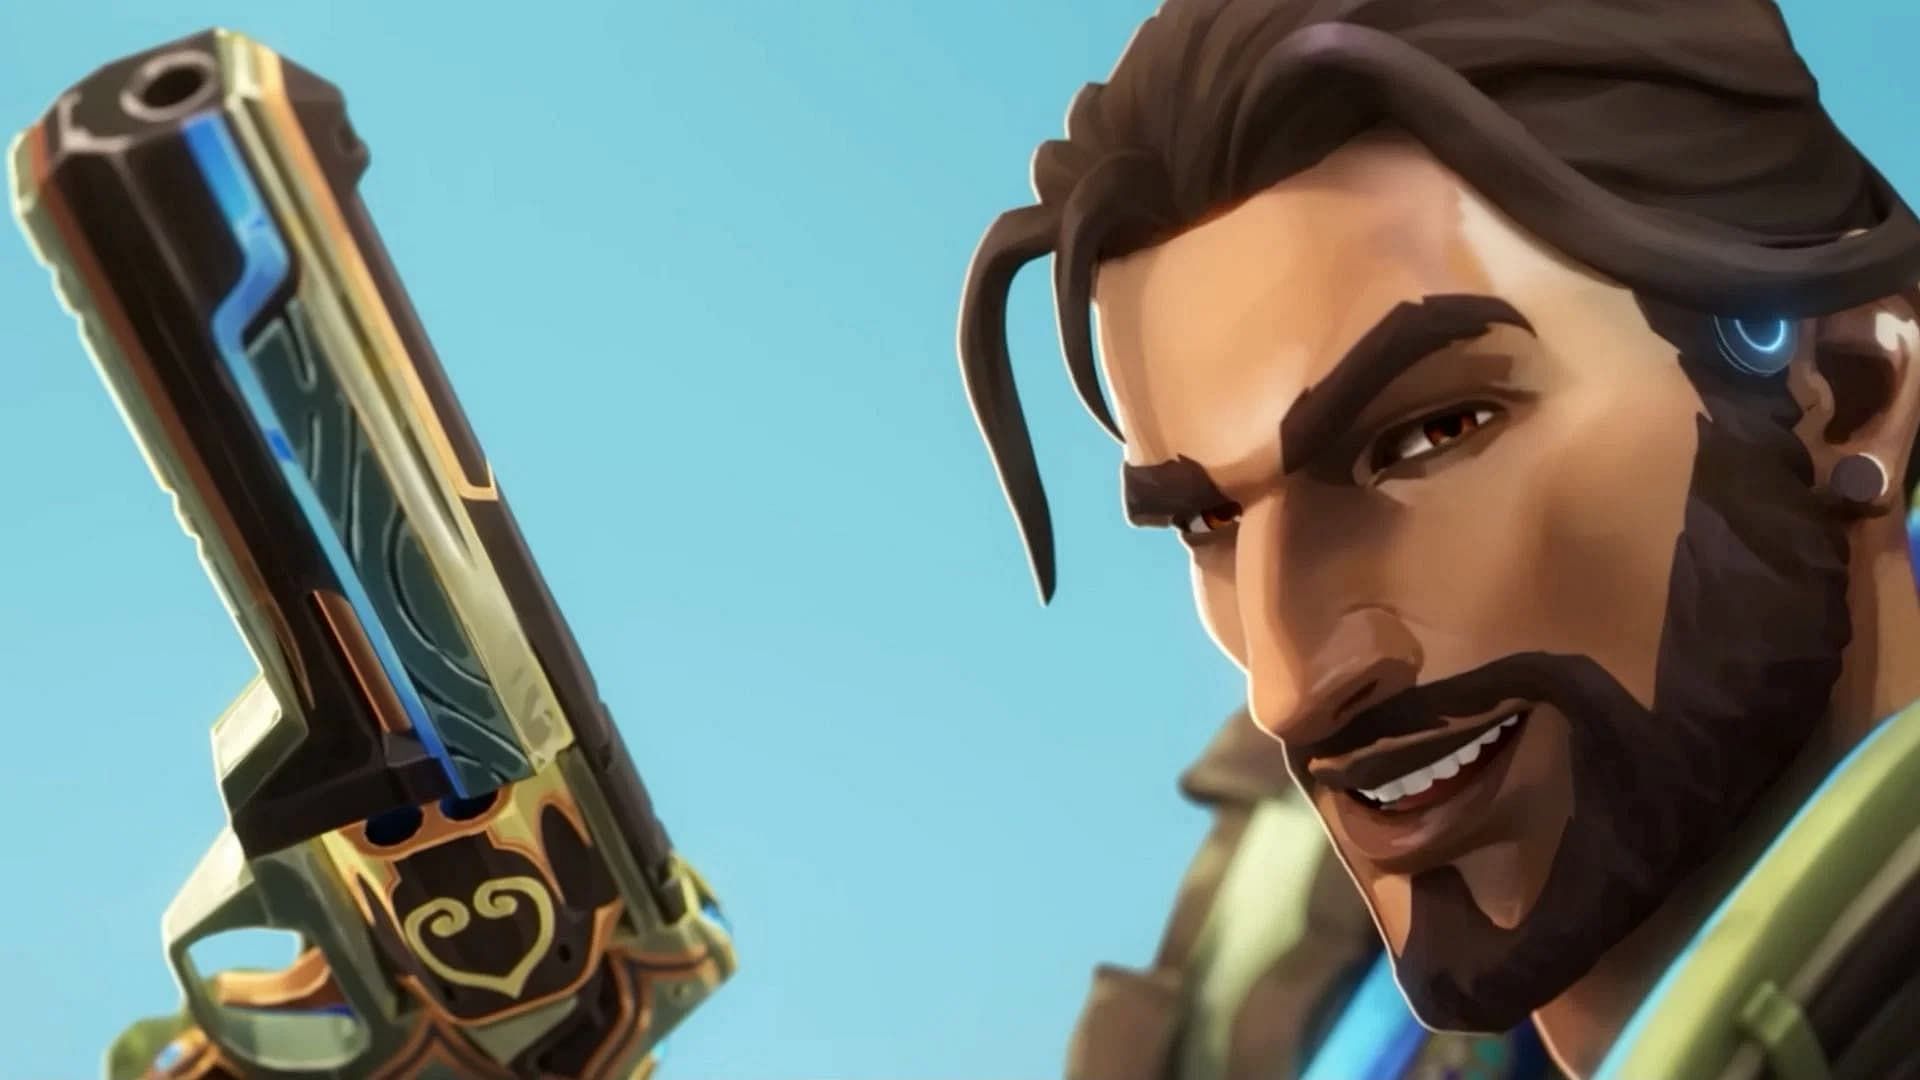 Harbor will have his very own Sheriff skin in Valorant (Image via Riot Games)